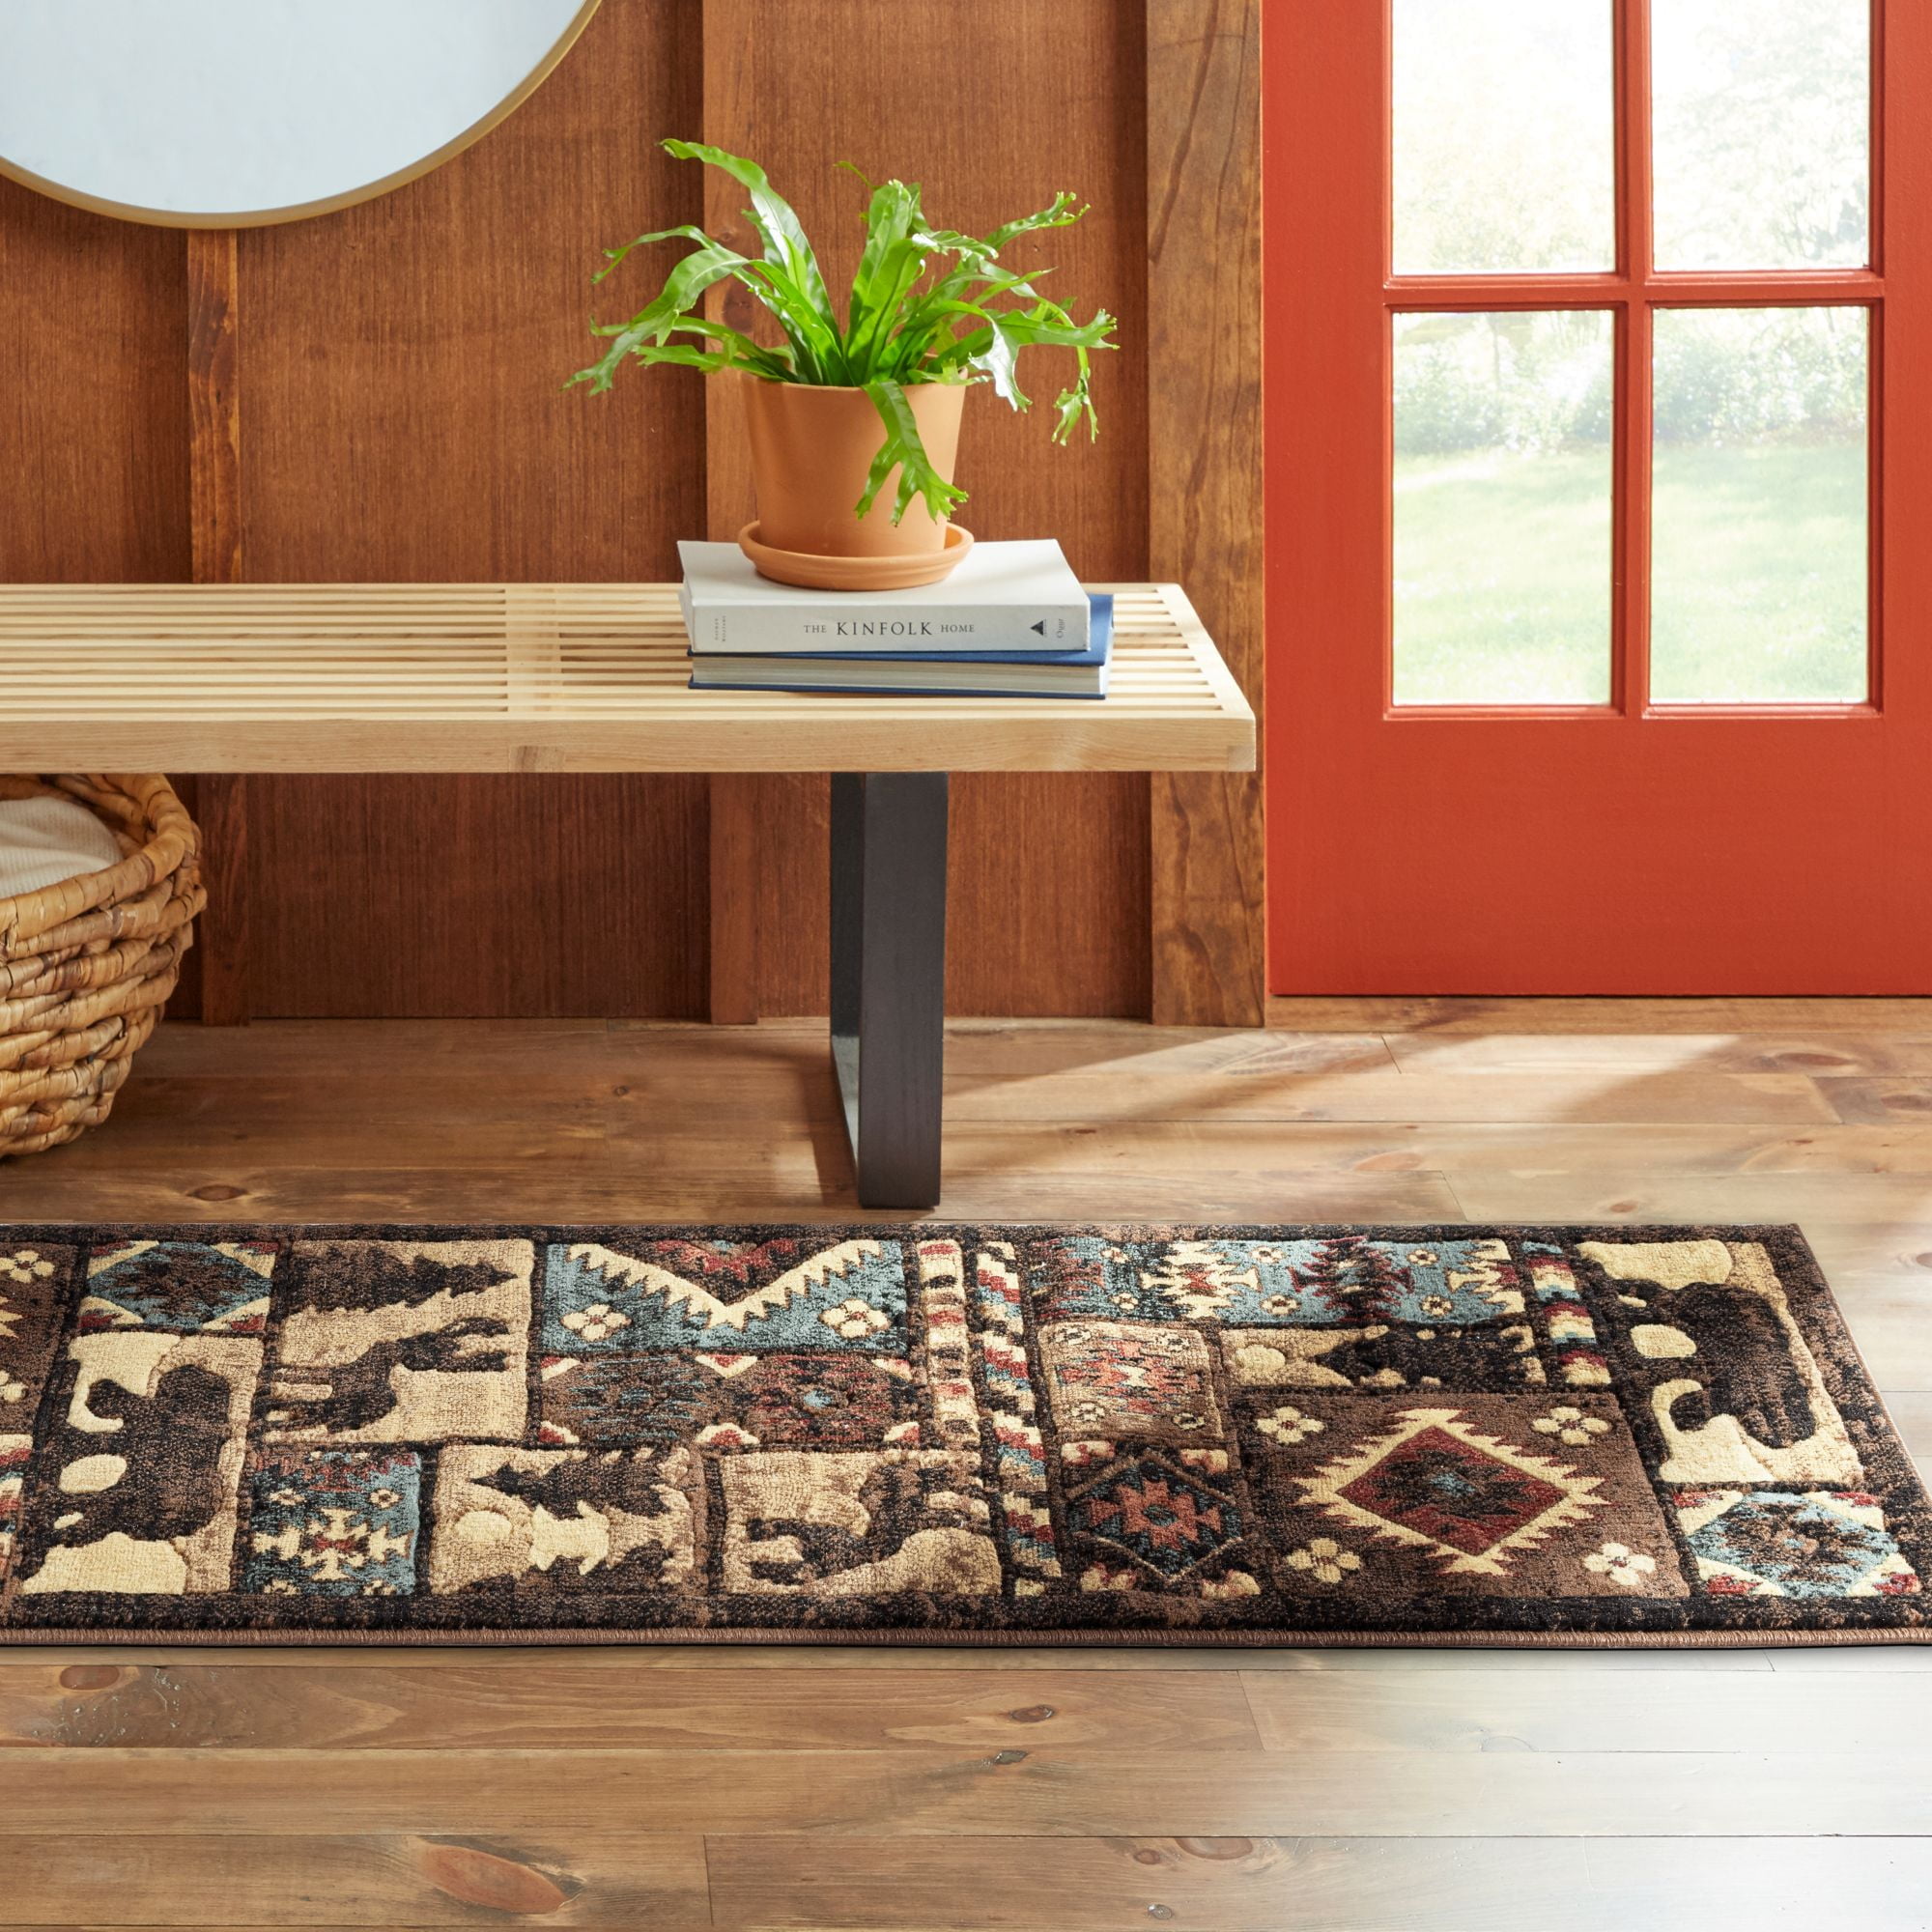 Approx 2'7" x7'3" 2x7 Nature Print Multi-Color Boxes Bears 6660 Runner Area Rug